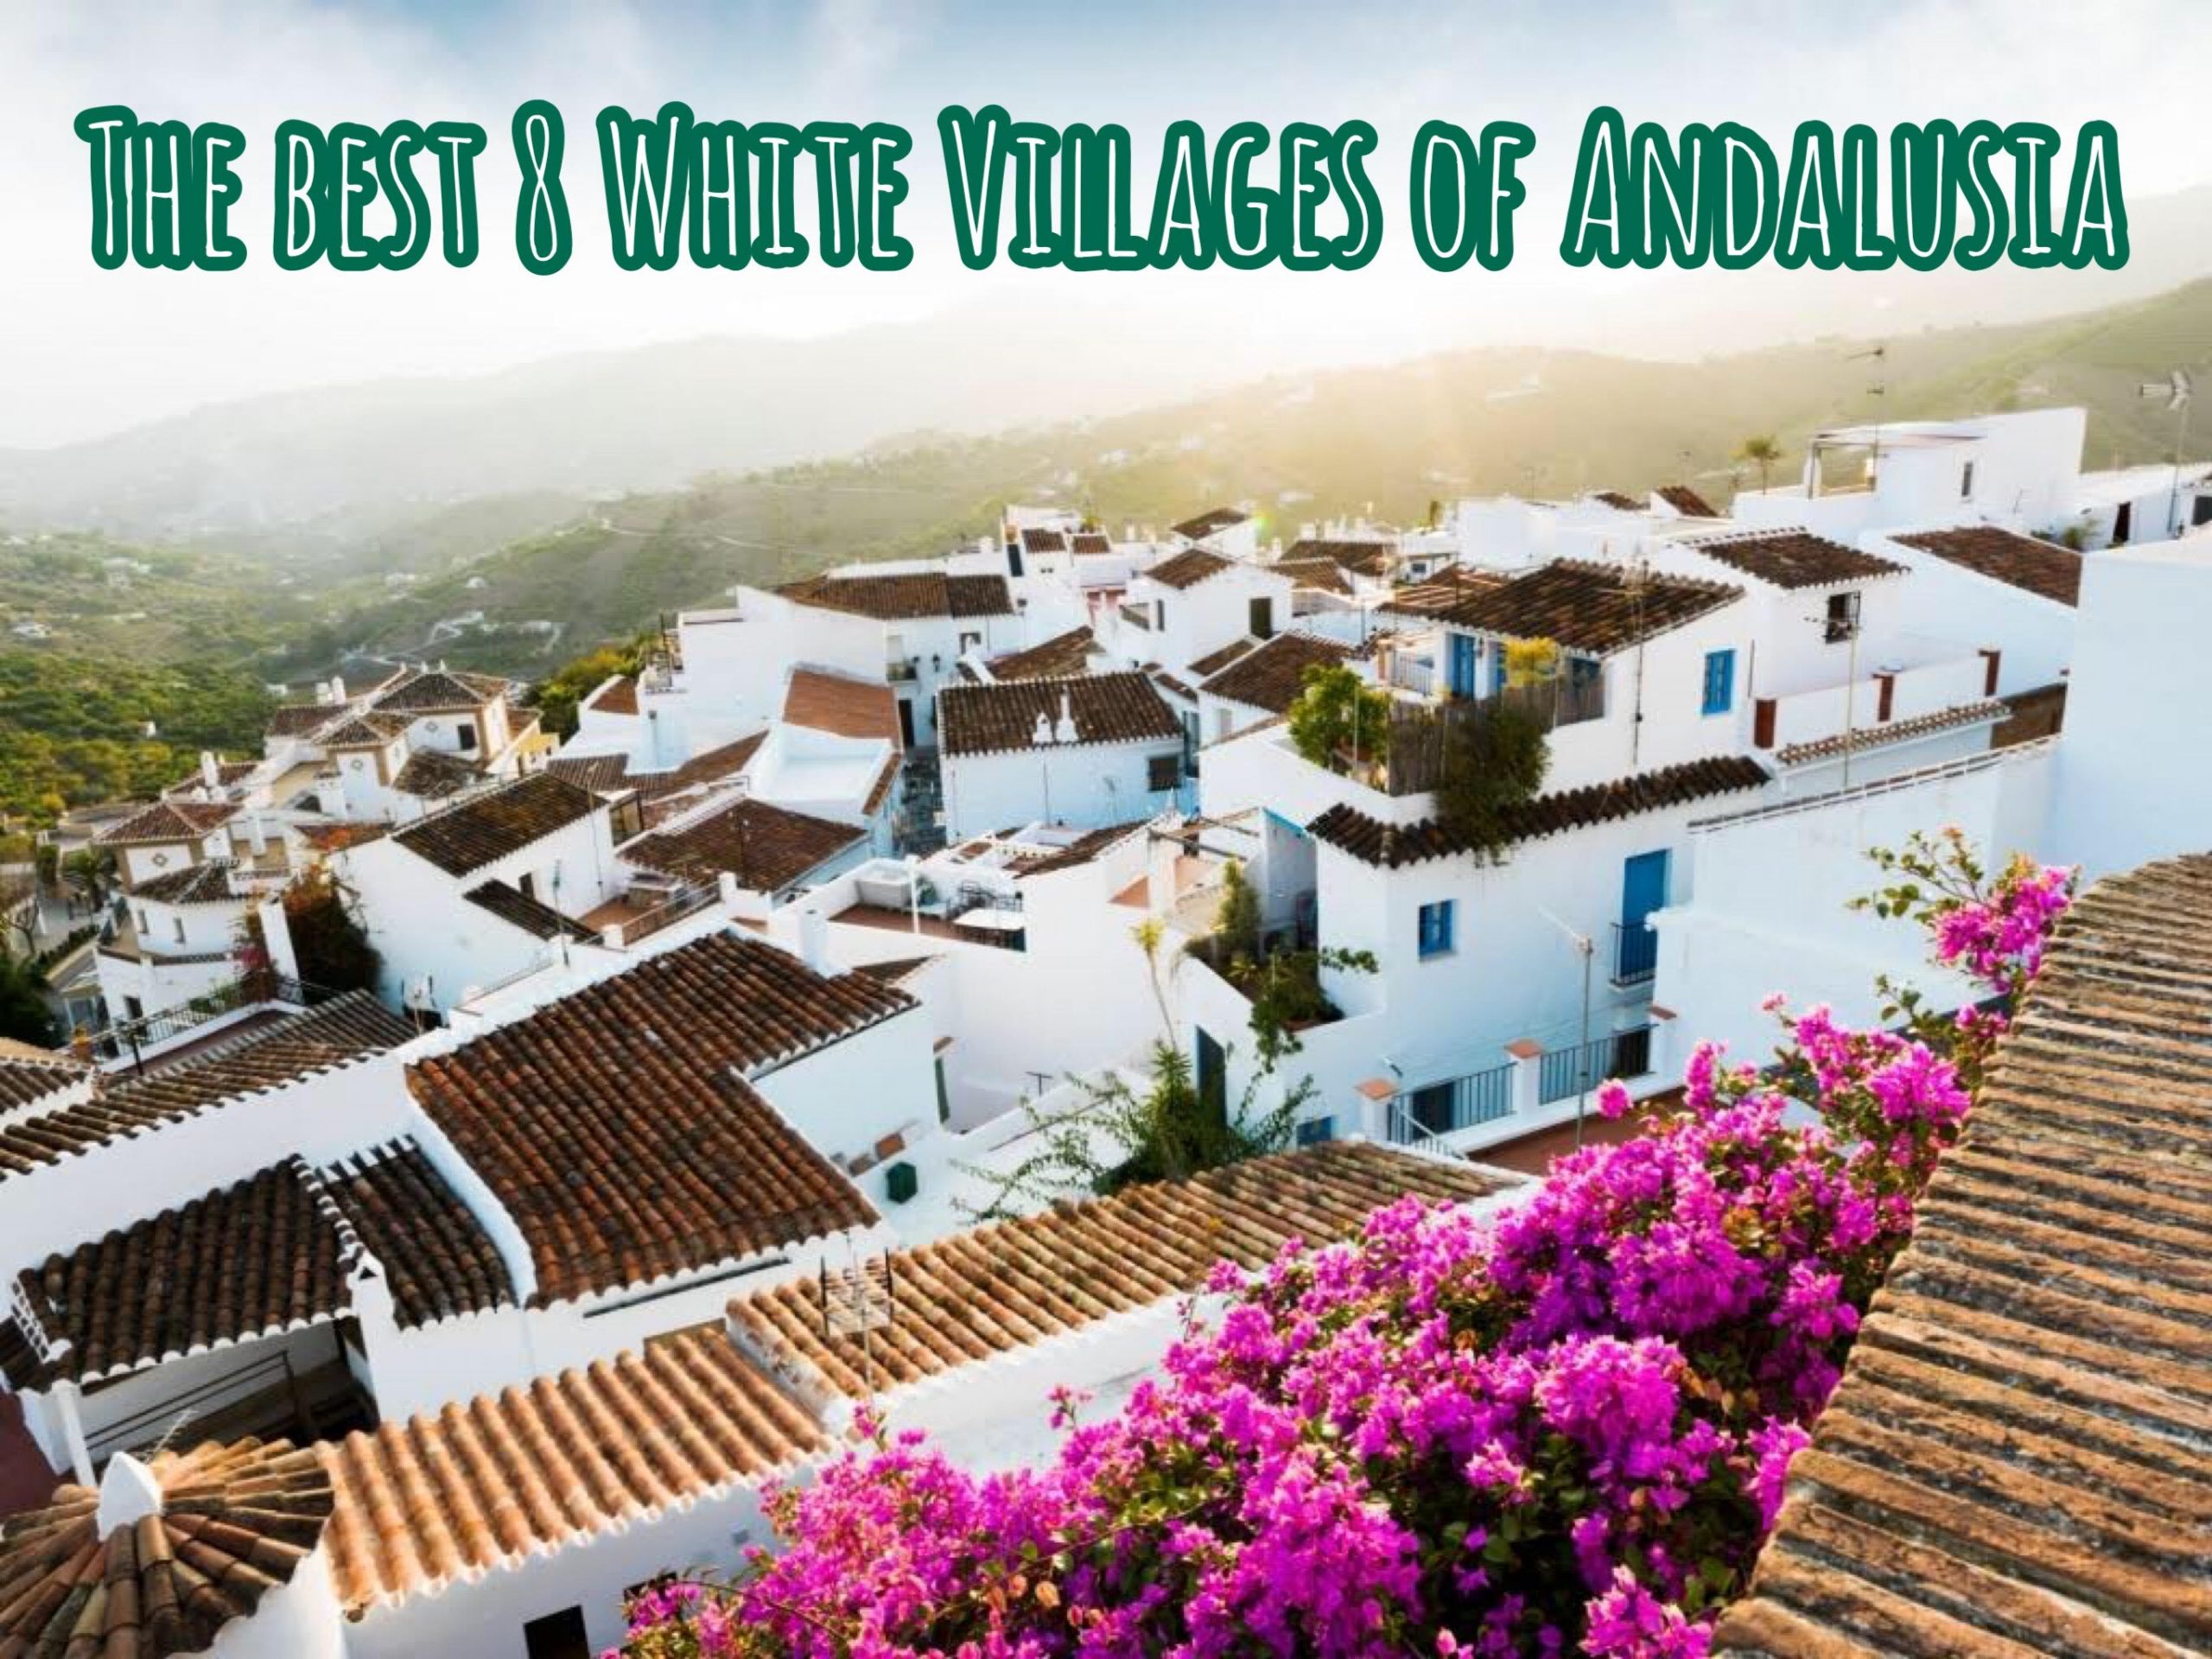 The best 8 White Villages of Andalusia